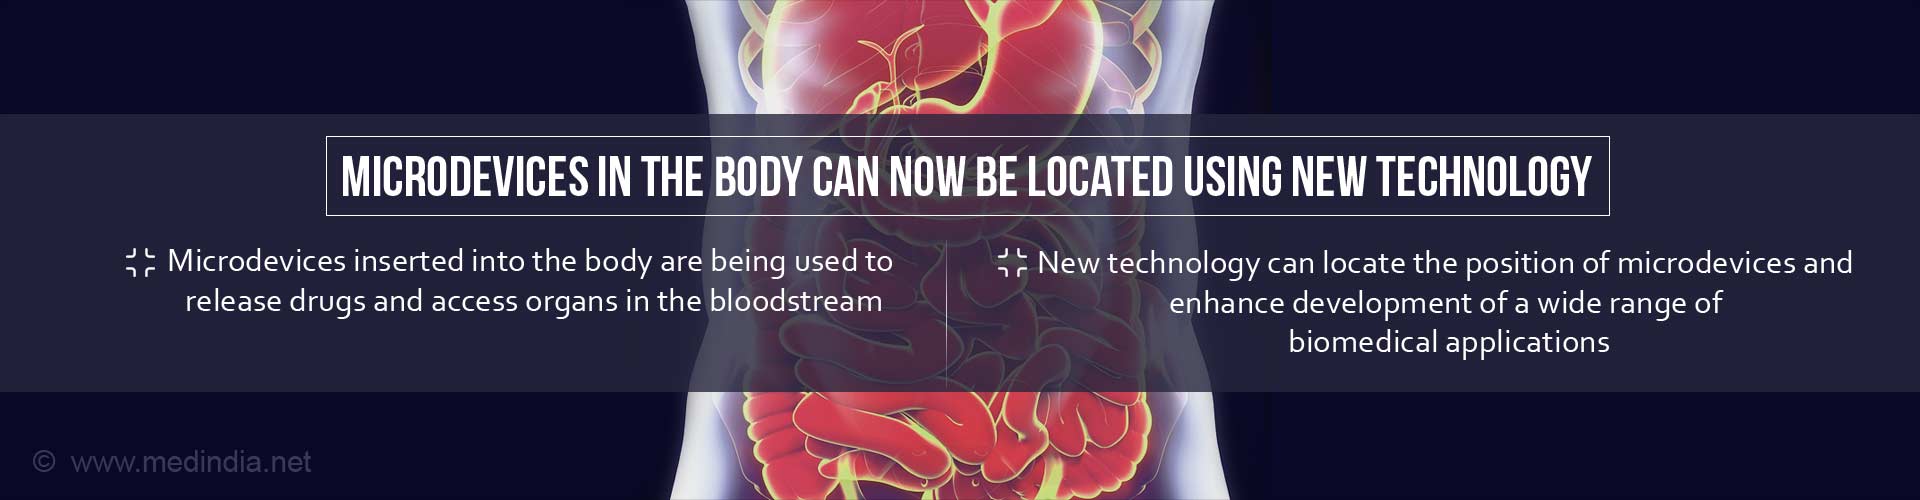 Microdevices in the body can now be located using new technology
- microdevices inserted into the body are being used to release drugs and access organs in the bloodstream
- new technology can locate the position of micro devices and enhance development of a wide range of biomedical applications